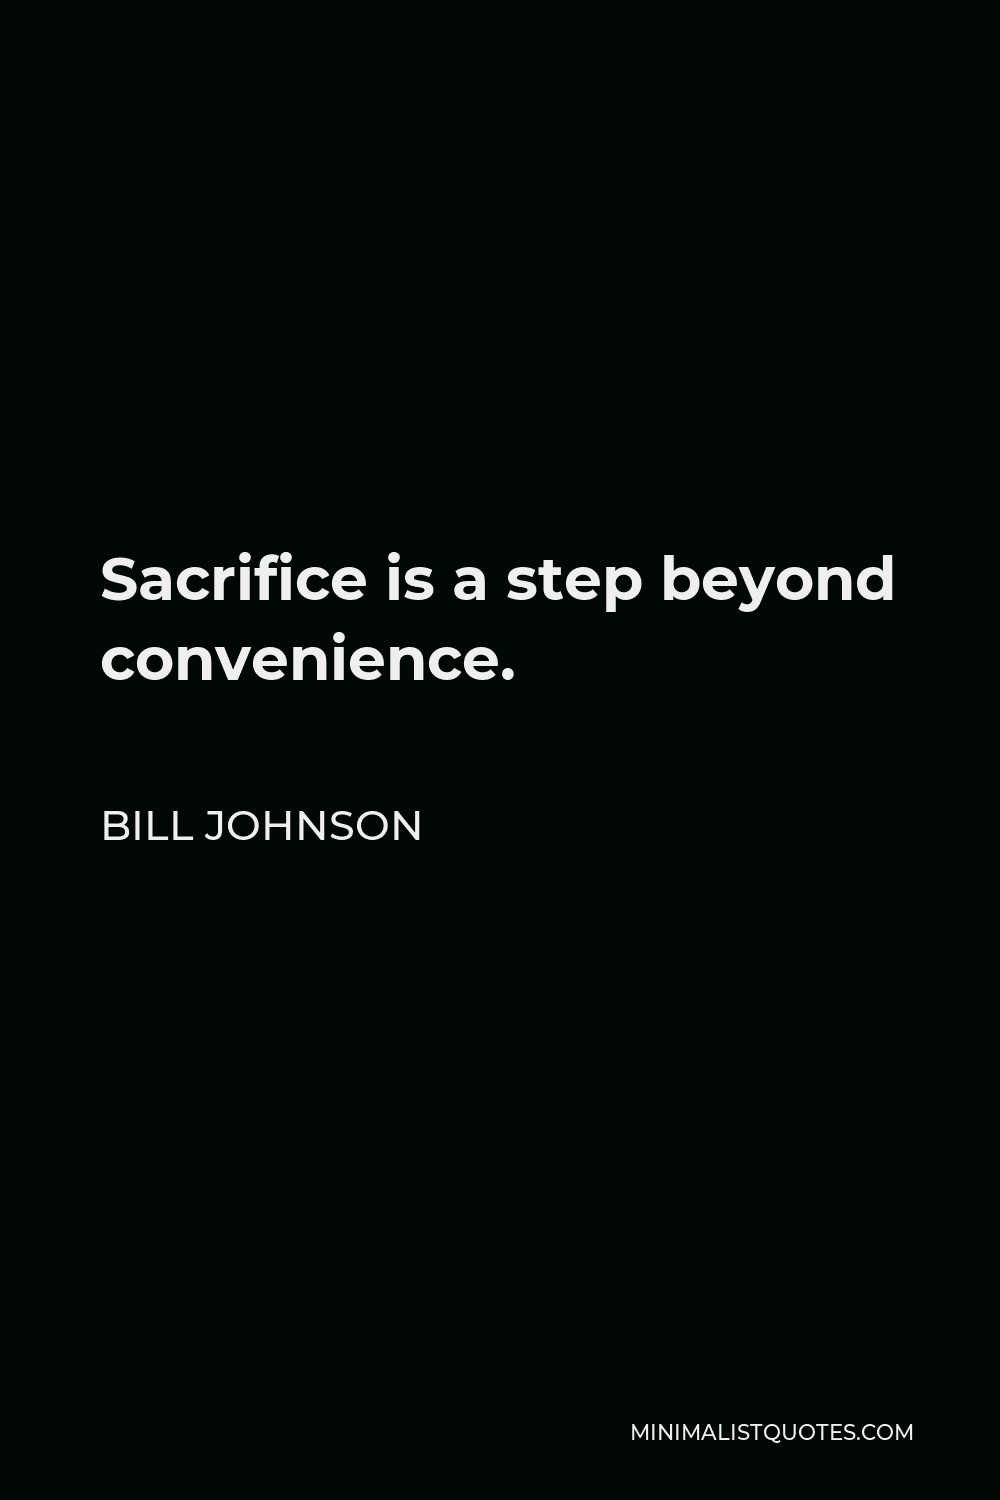 Bill Johnson Quote - Sacrifice is a step beyond convenience.